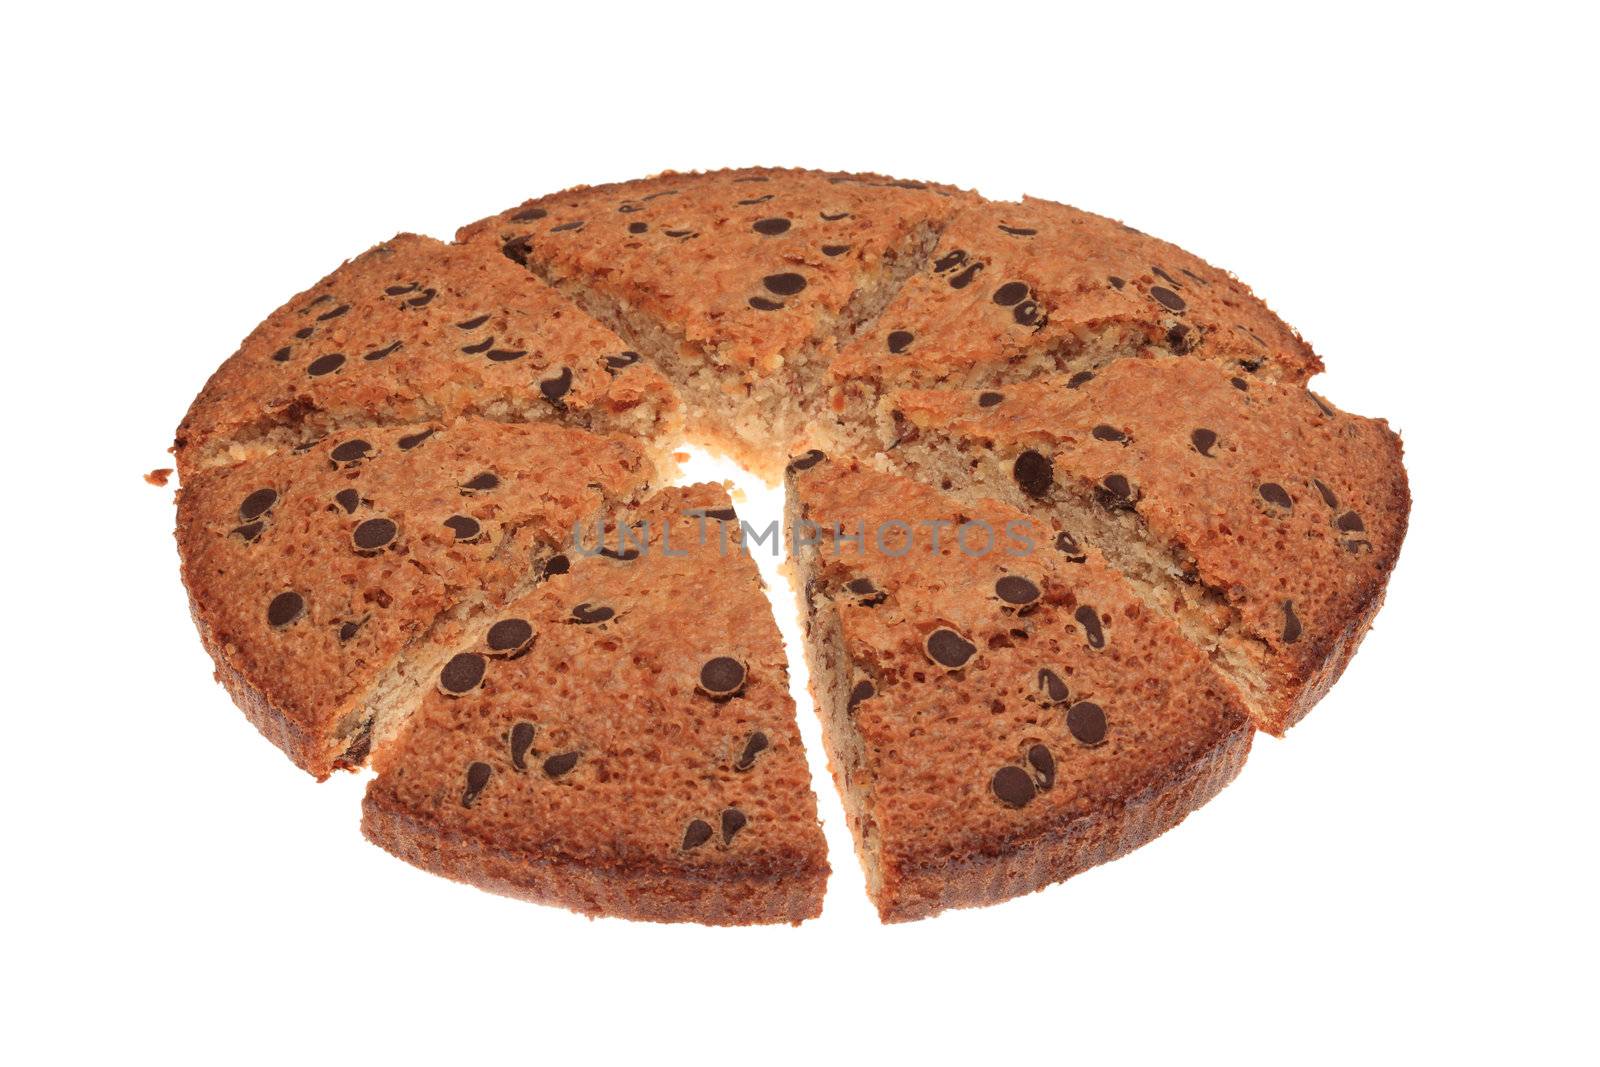 Image of a sliced round cake with chocolate isolated against a white background.